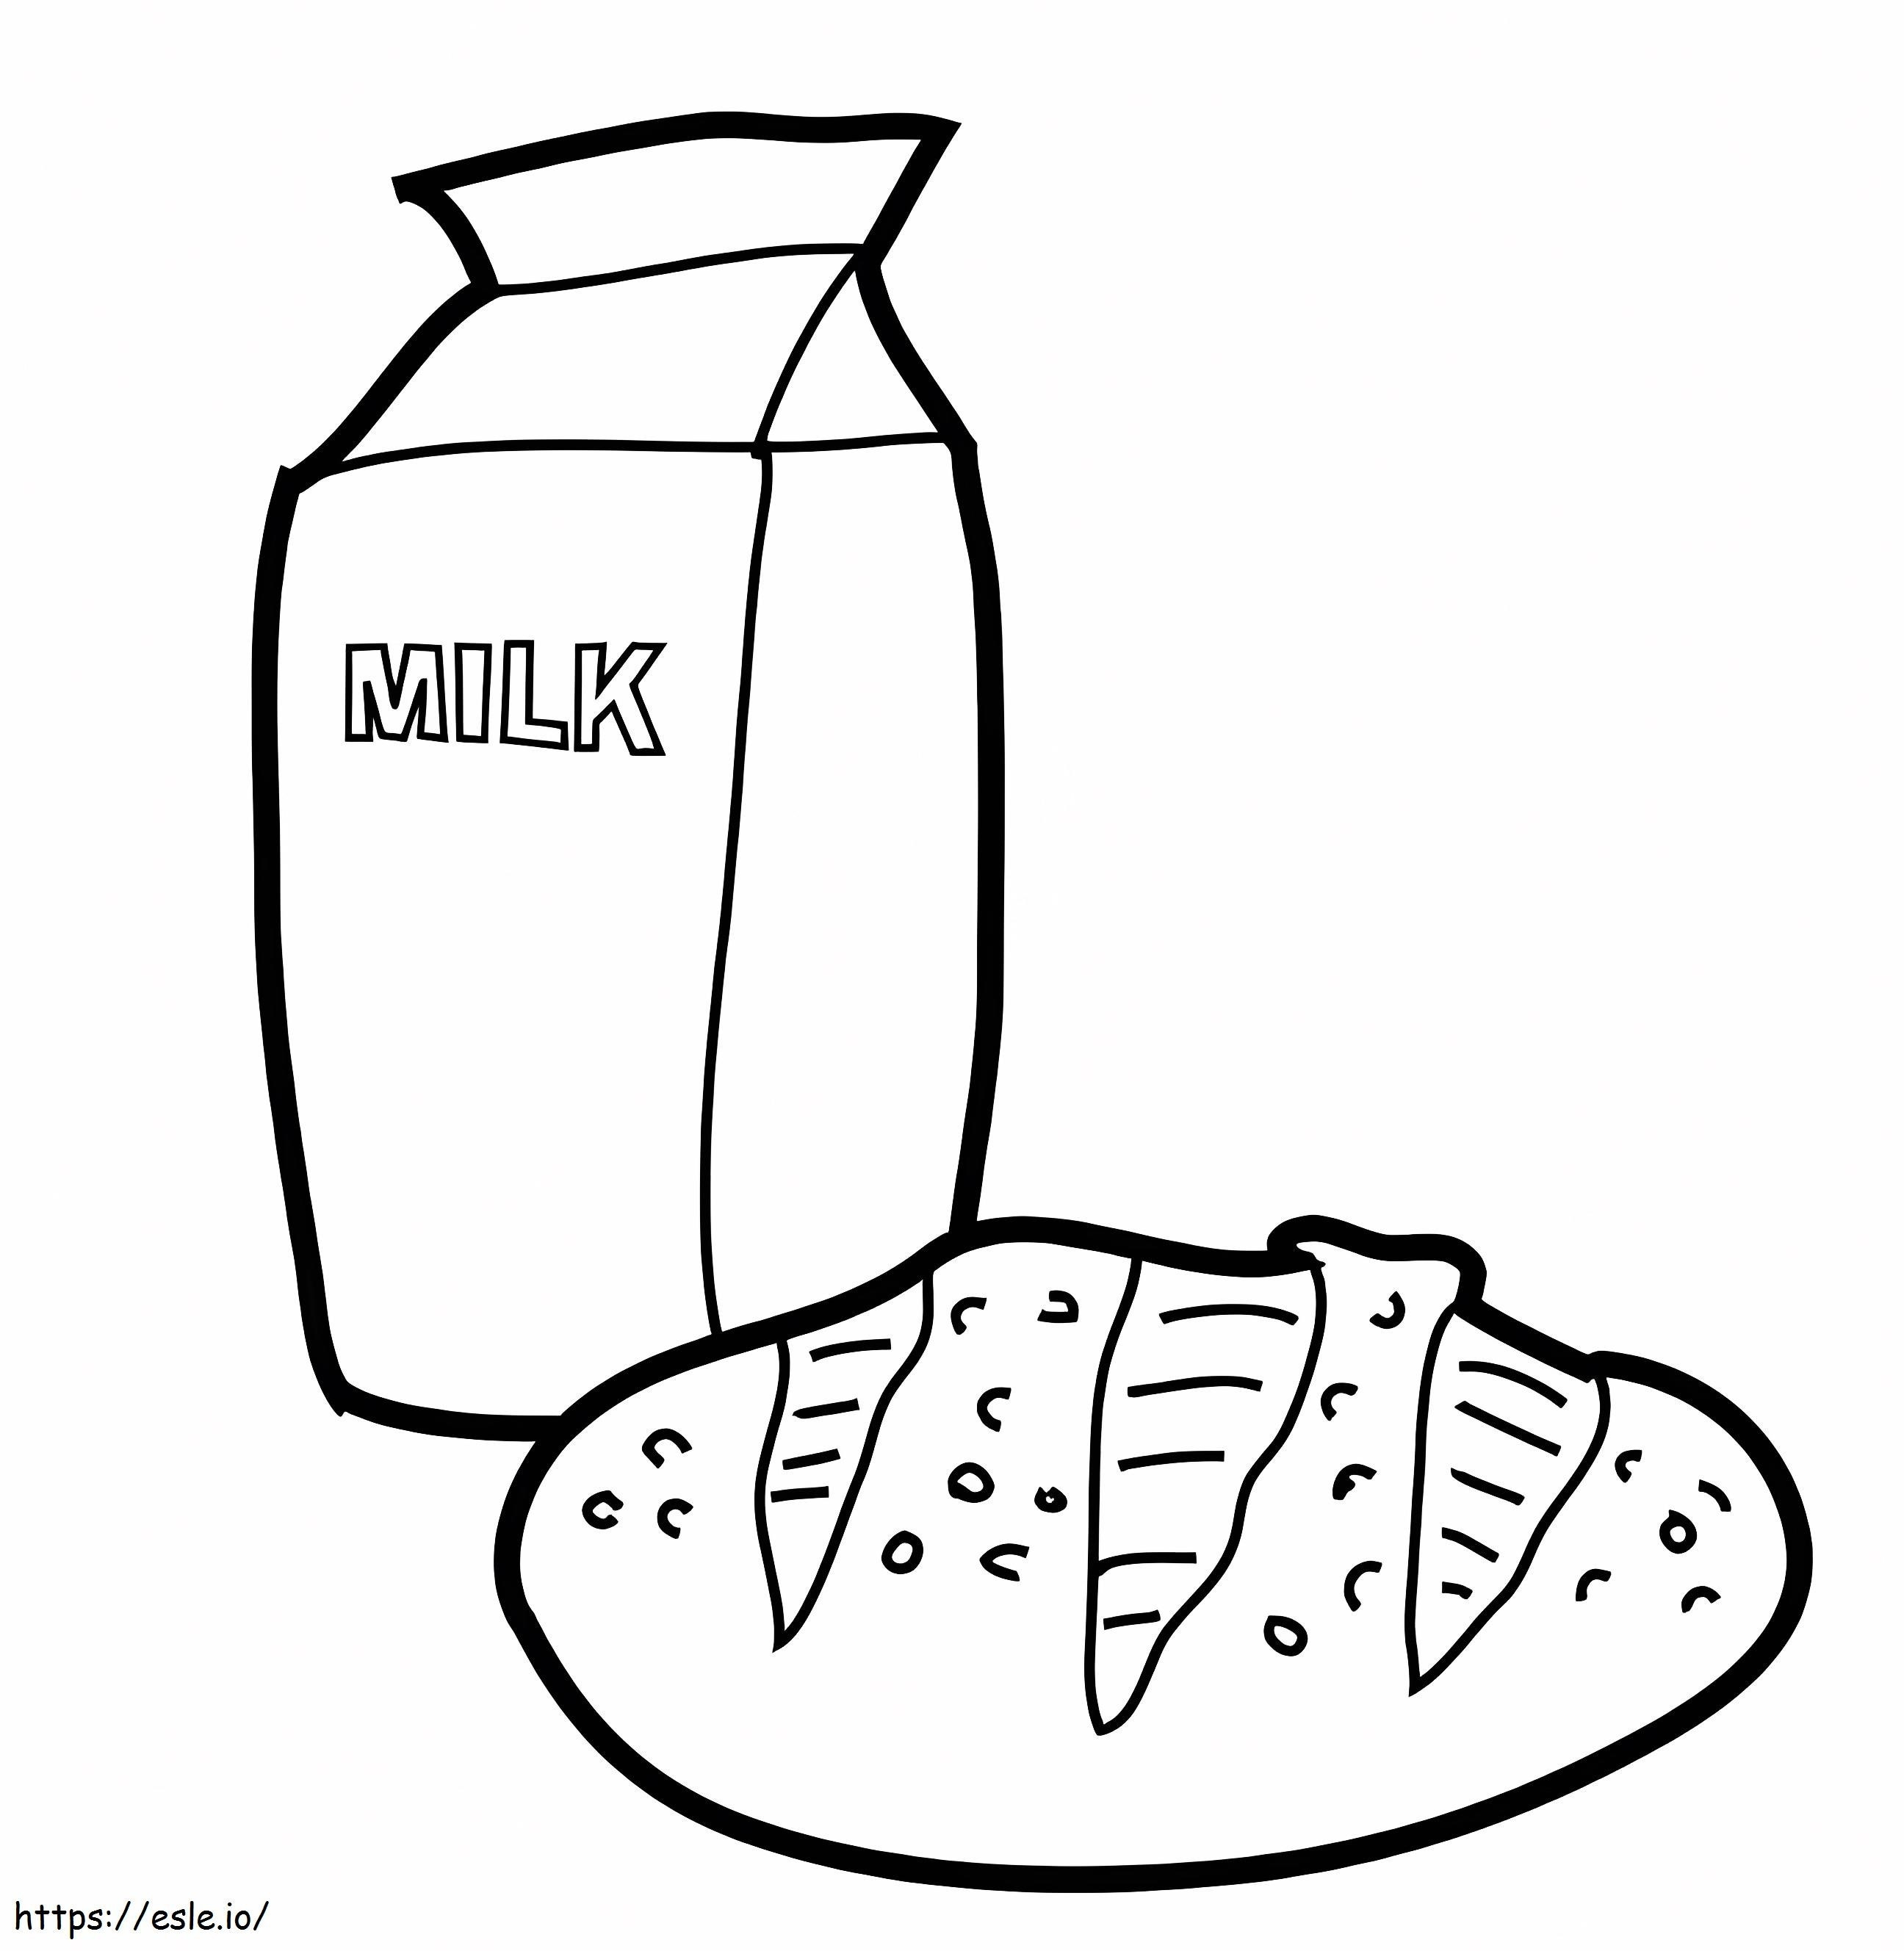 Milk And Bread coloring page